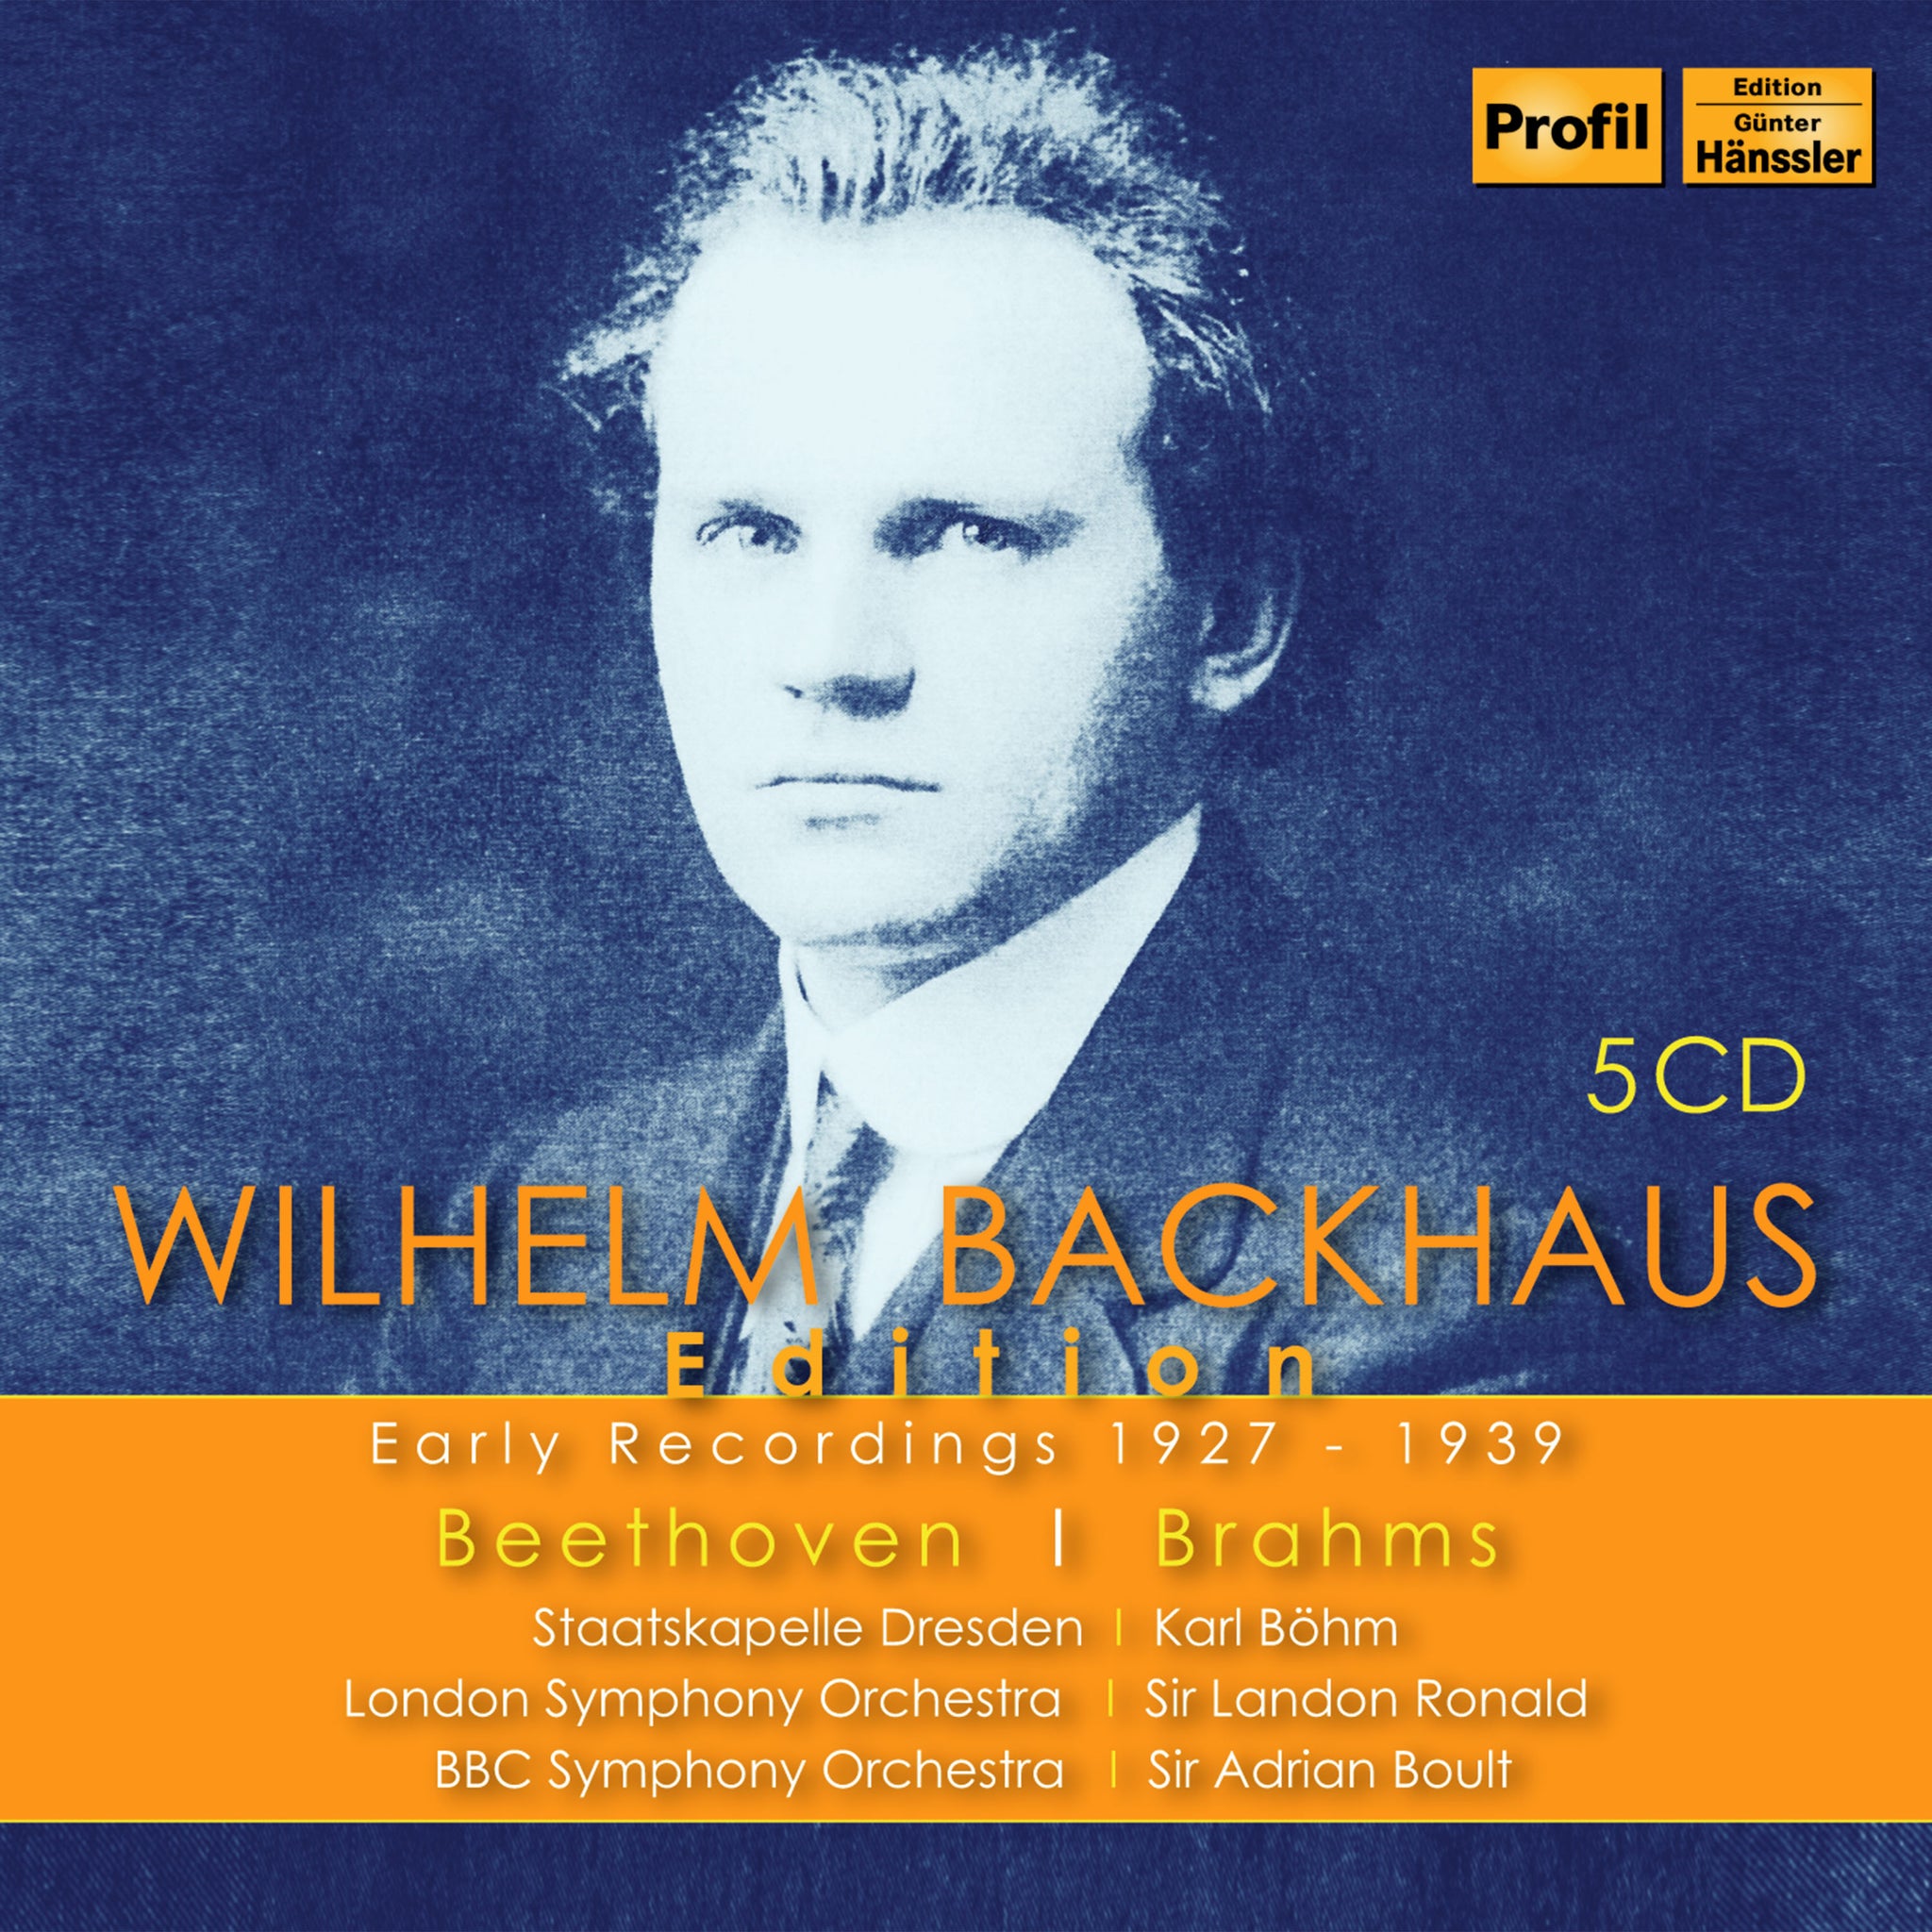 Wilhelm Backhaus Edition - Early Recordings 1927-1939